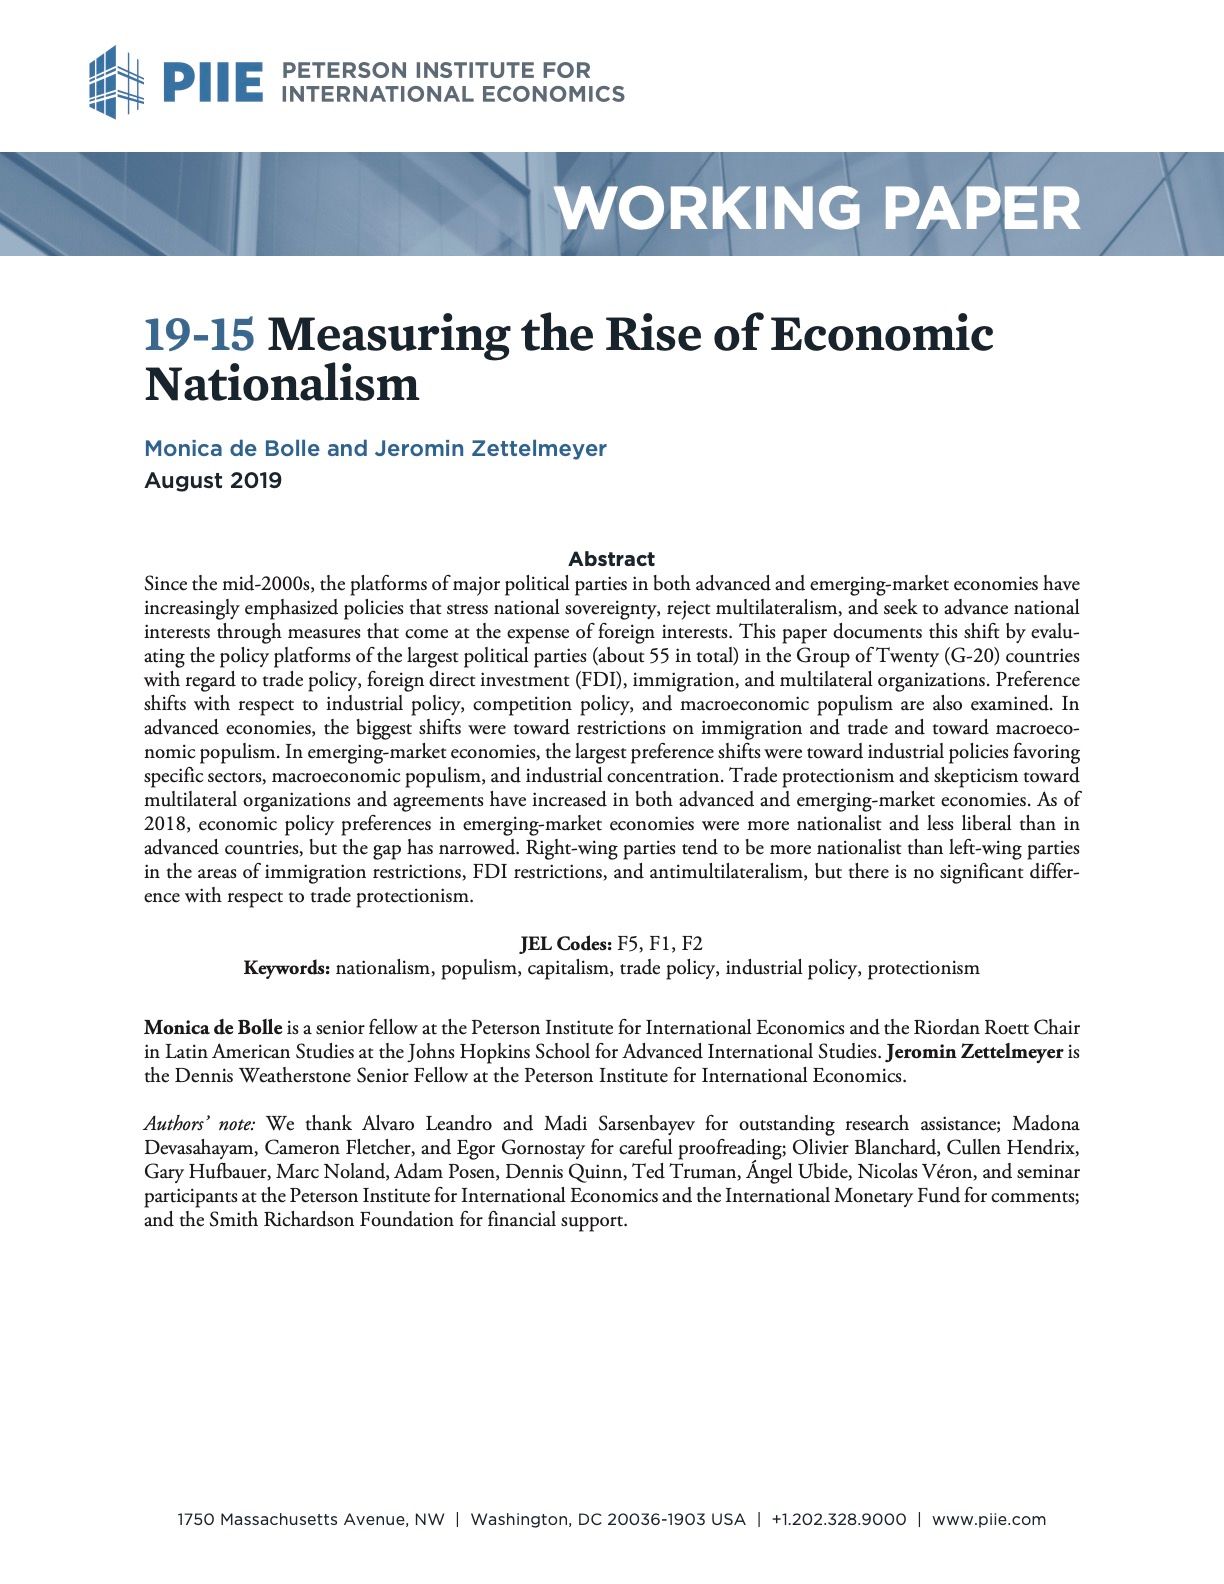 Measuring the Rise of Economic Nationalism